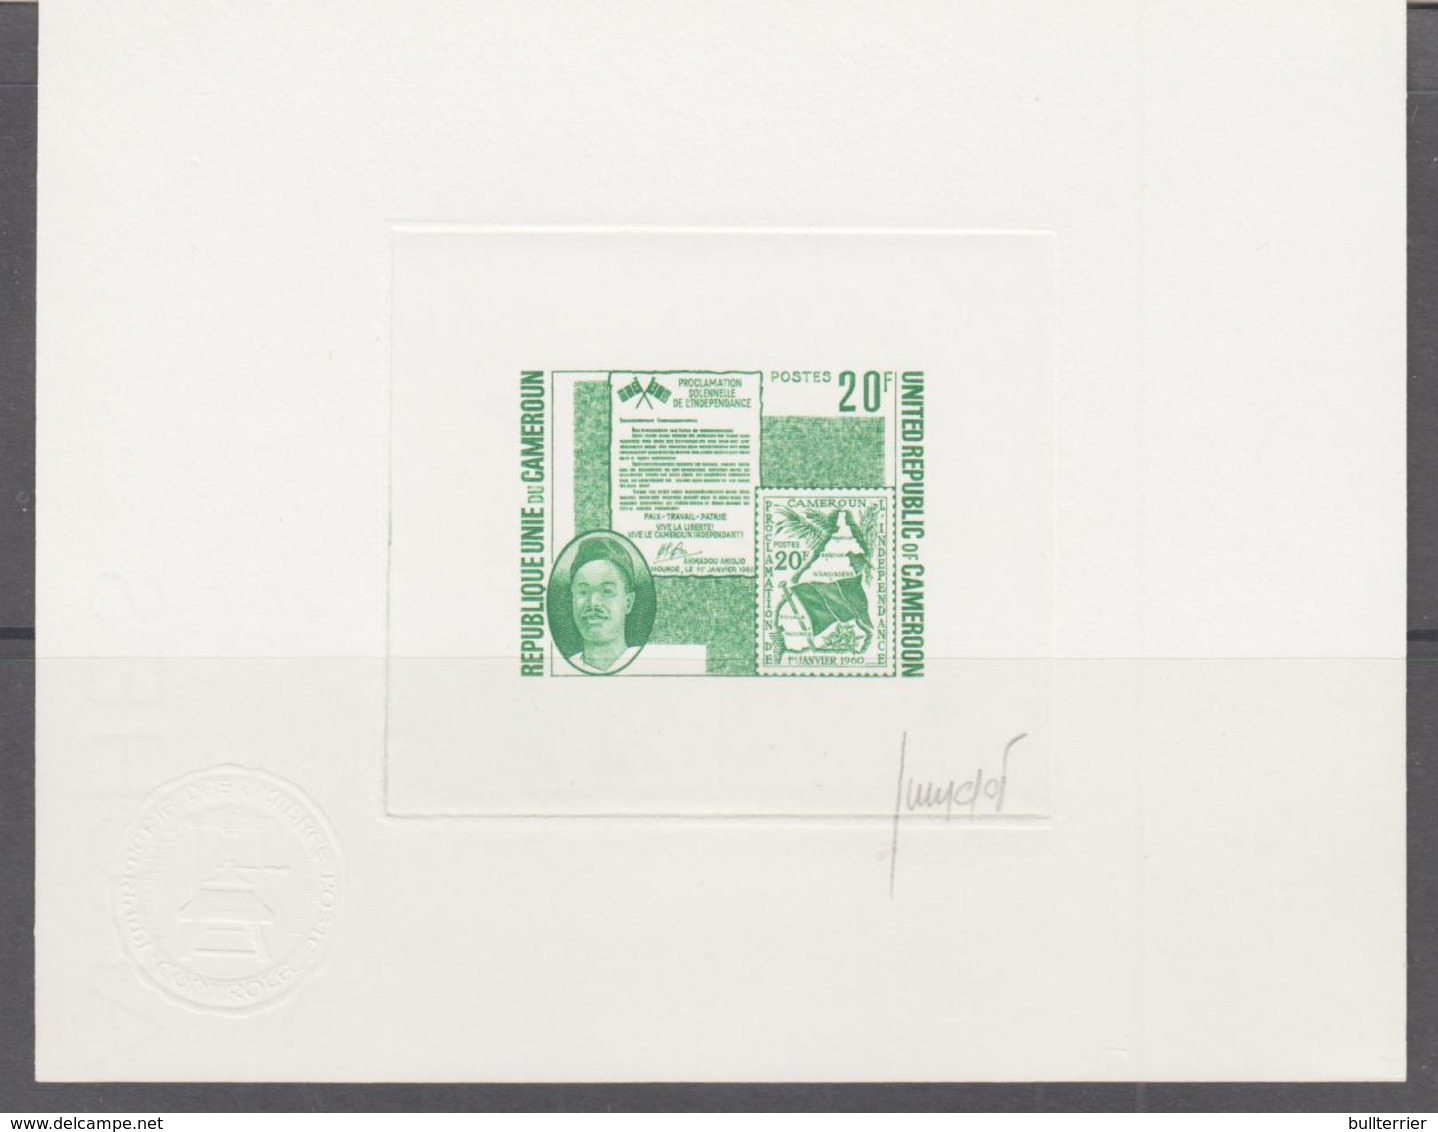 CAMEROUN - 1971- PHILATCAM  / STAMPS ON STAMPS  20FR  SUNKEN DIE PROOF IN GREEN SIGNED BY  DESIGNER - Cameroon (1960-...)